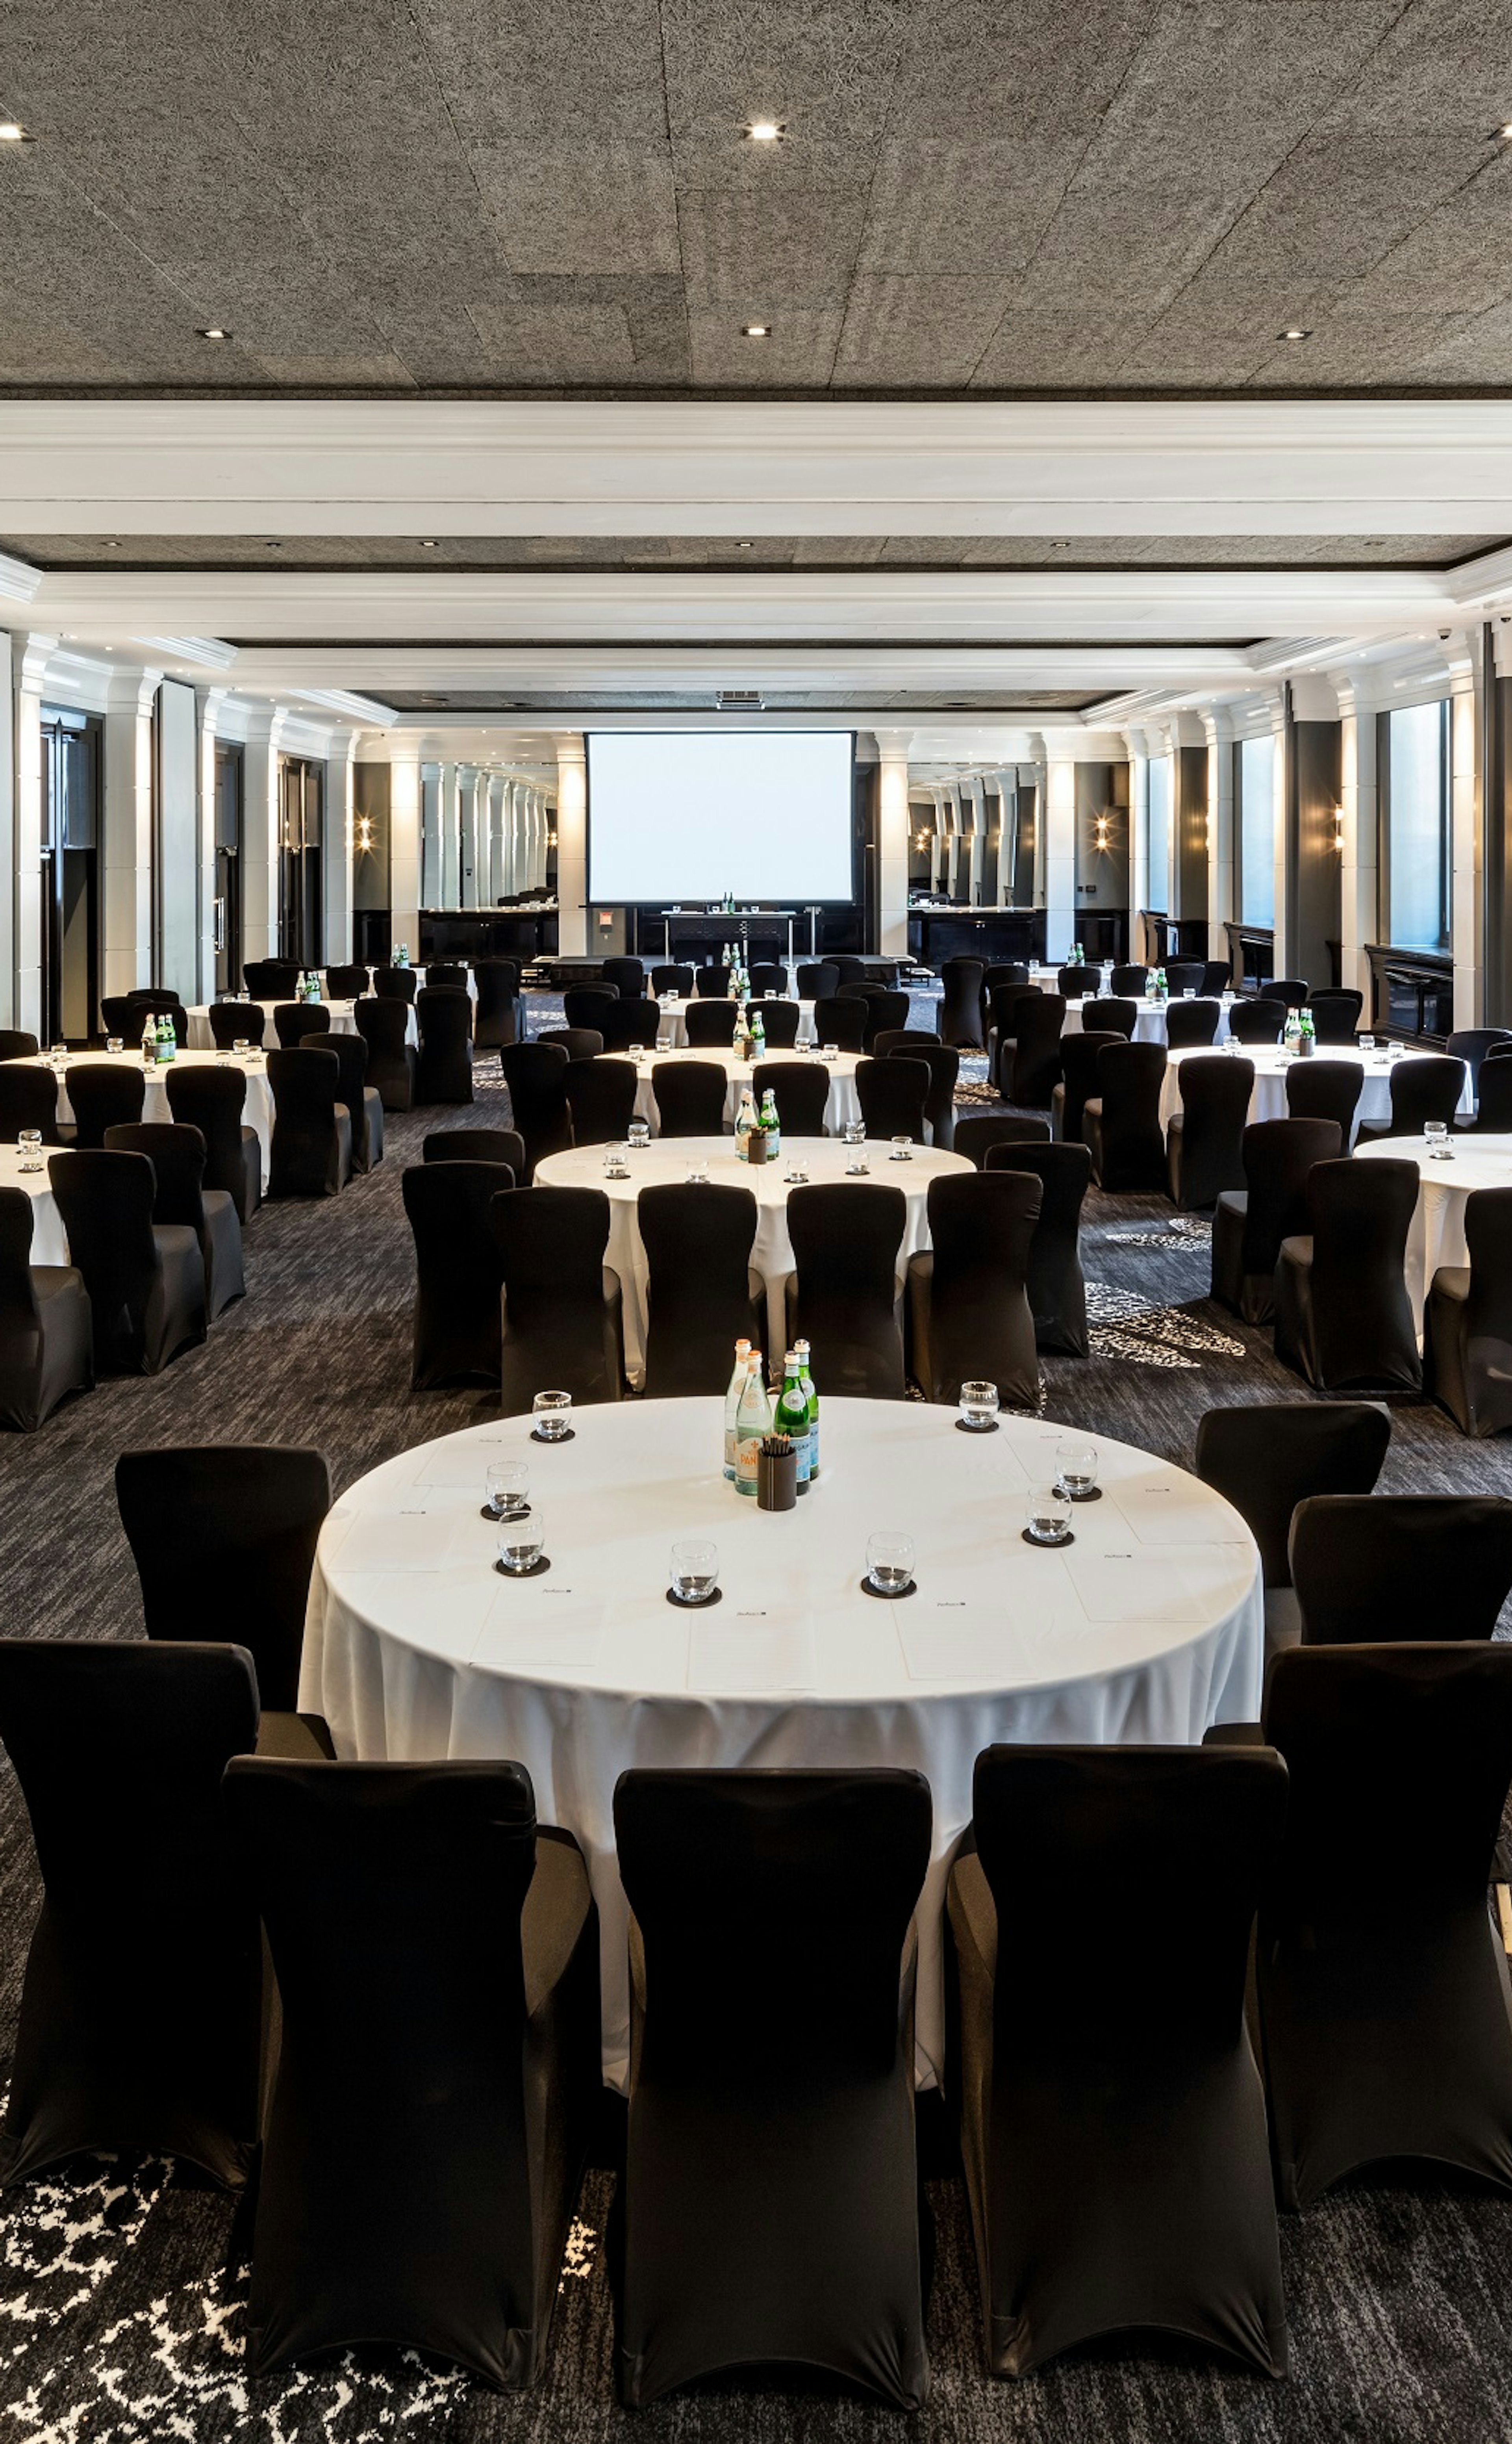 Large Conference Venues - The Edwardian Manchester, A Radisson Collection Hotel